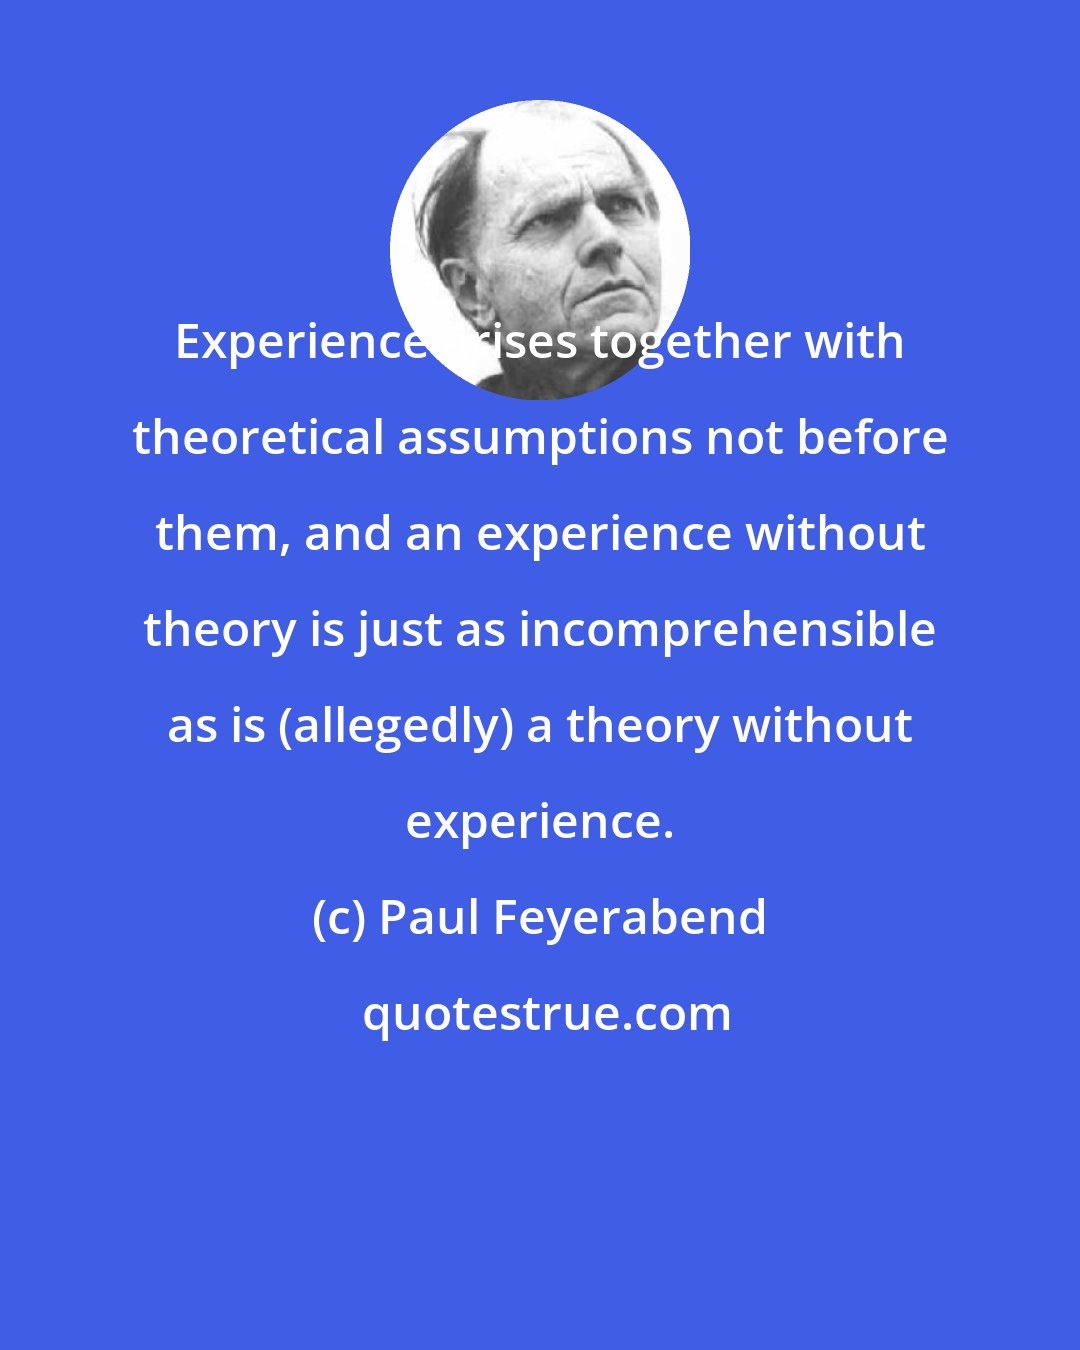 Paul Feyerabend: Experience arises together with theoretical assumptions not before them, and an experience without theory is just as incomprehensible as is (allegedly) a theory without experience.